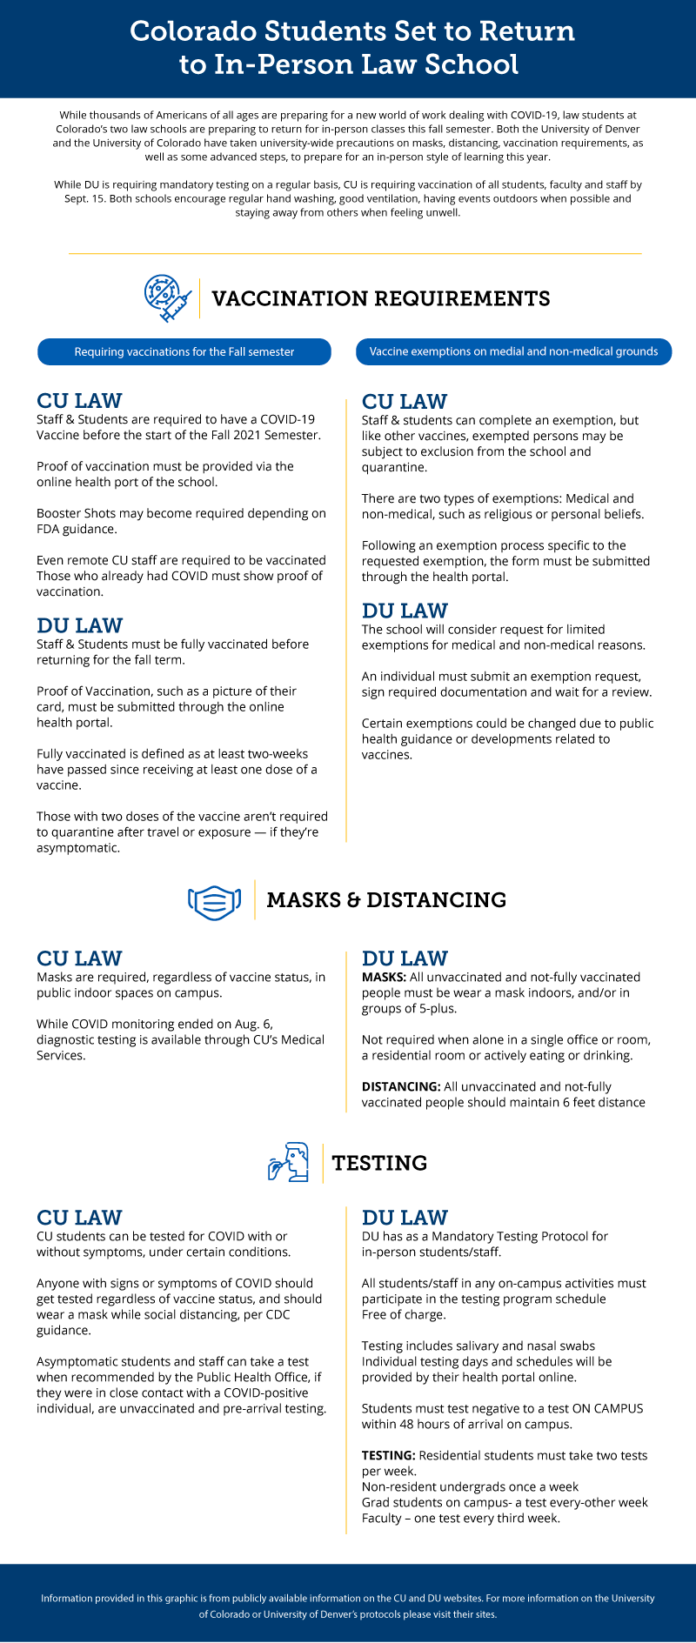 As students return to colleges across the U.S., Colorado's two law schools are taking steps to ensure student safety on campus. These requirements and actions taken by the schools are not solely effective to the law schools, but apply to all students, staff and faculty on the campuses — regardless of seniority or grad program. Specific details on individual student requirements are available on the students' web portals.